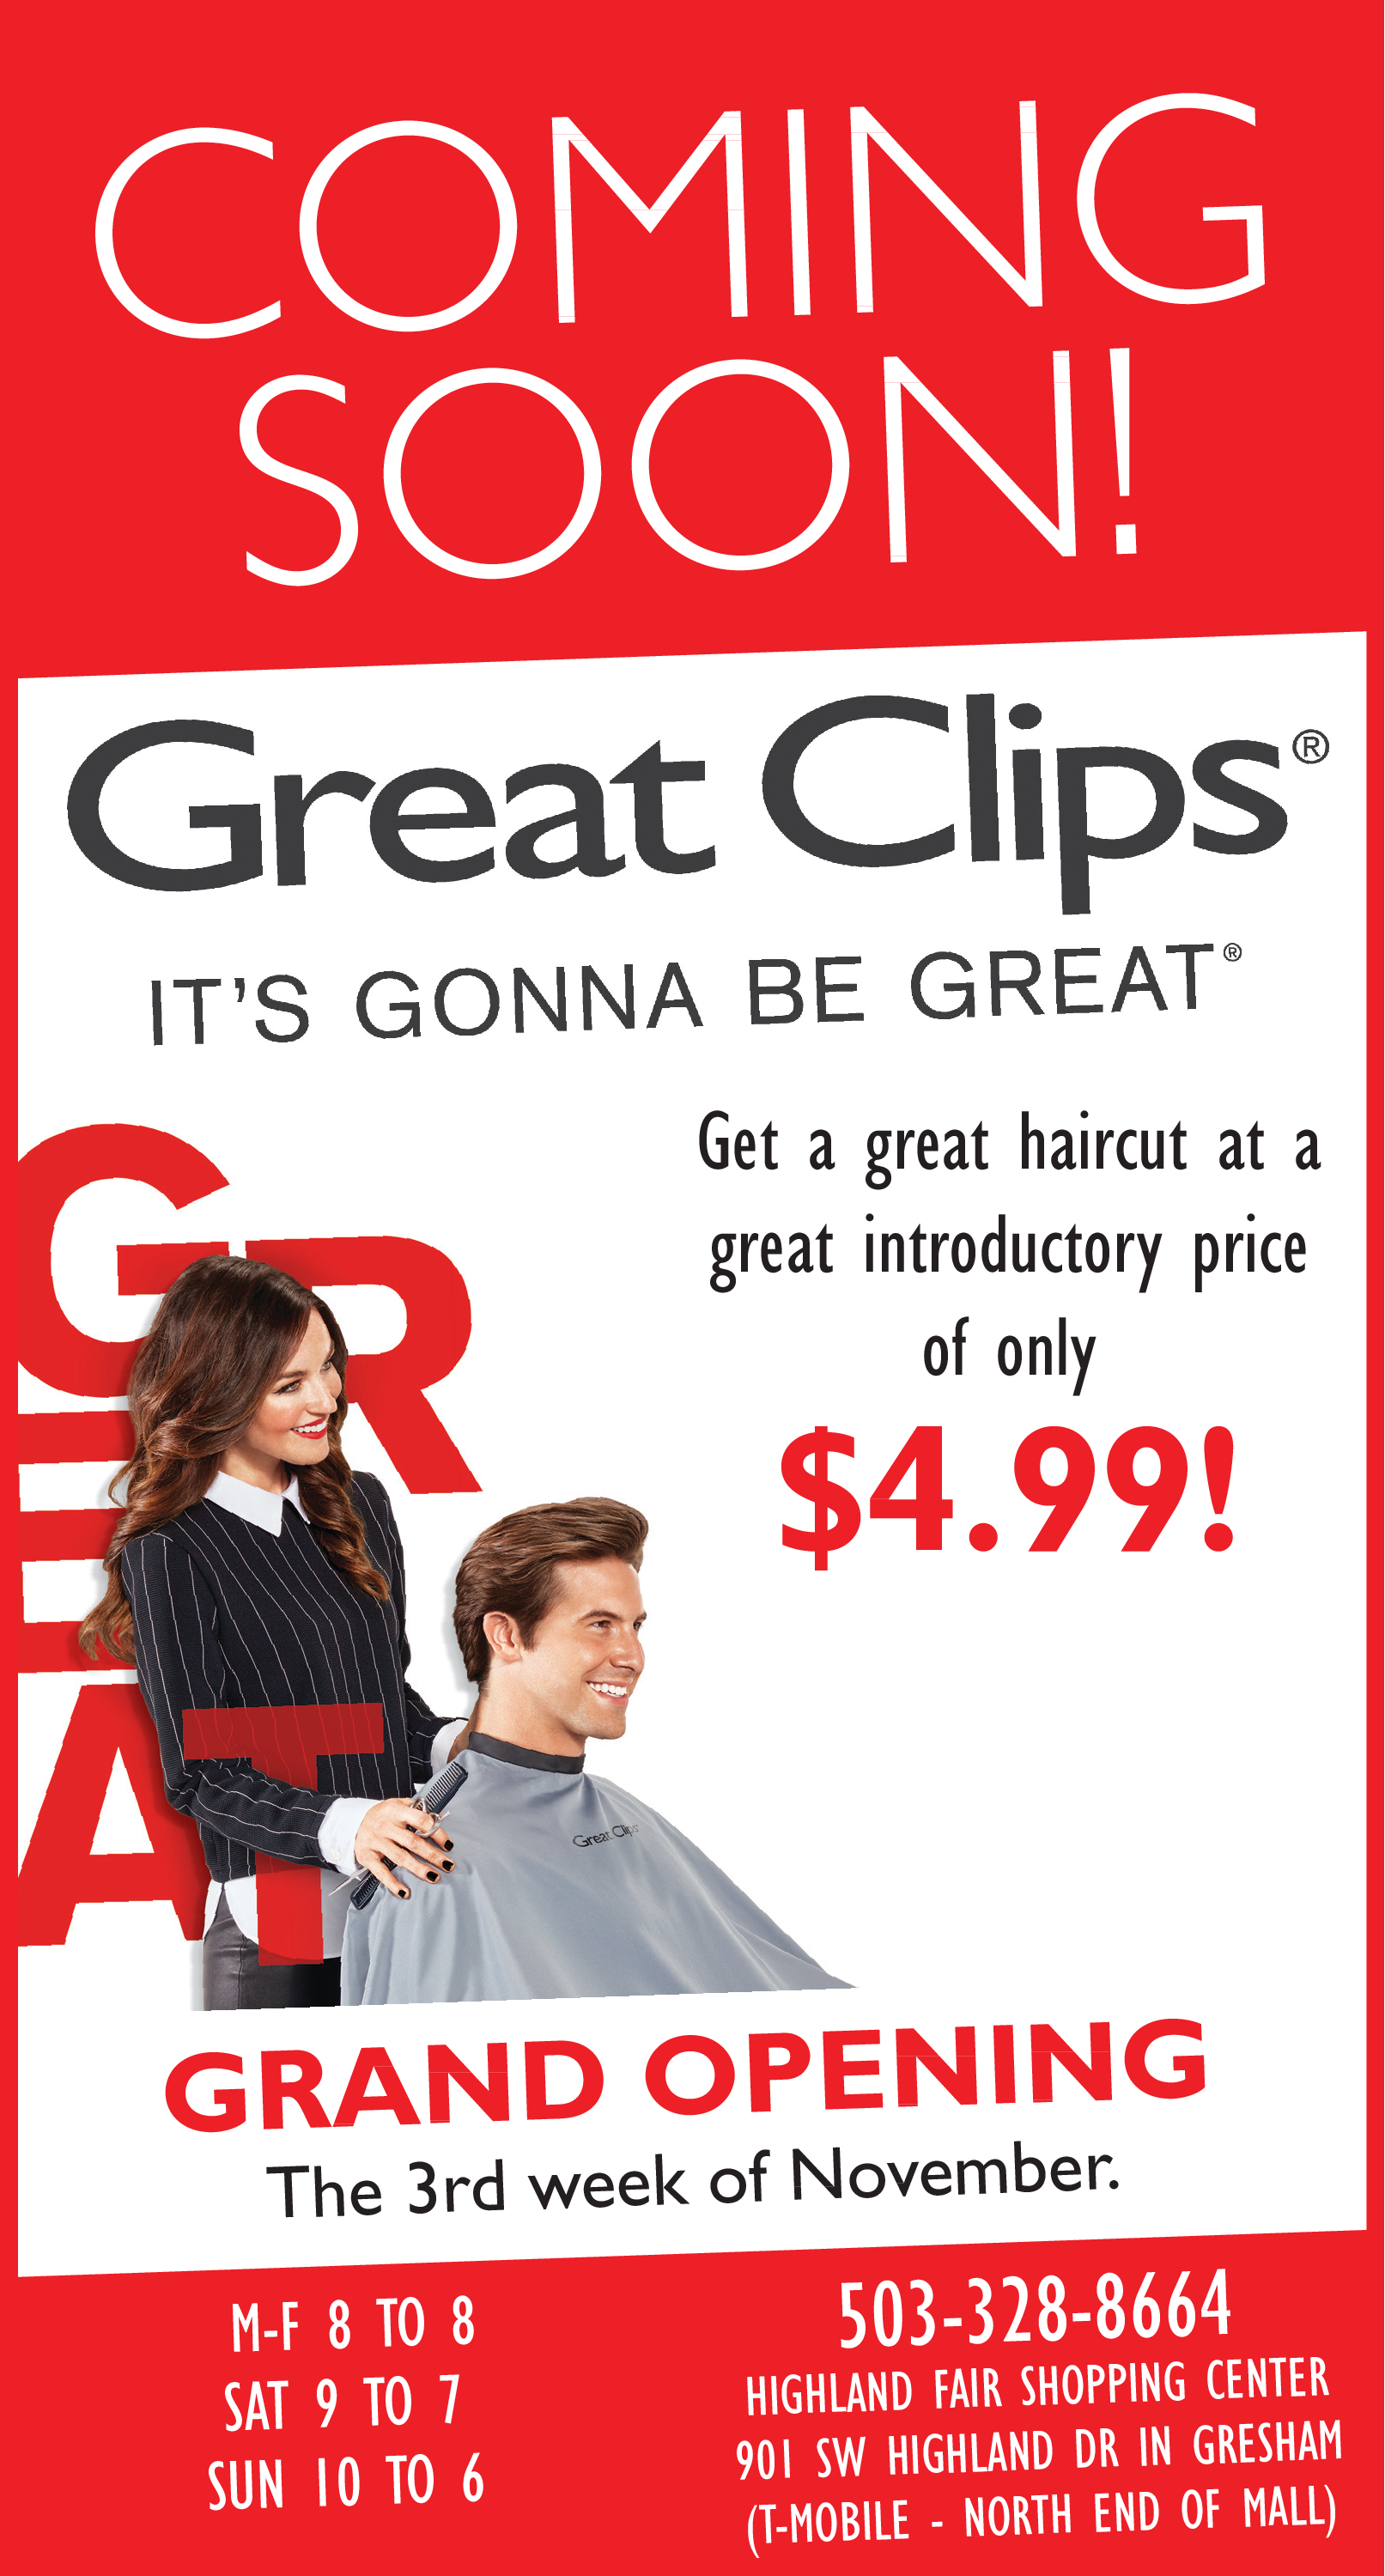 Get Haircut At Great Introductory Price In Gresham Or Hair